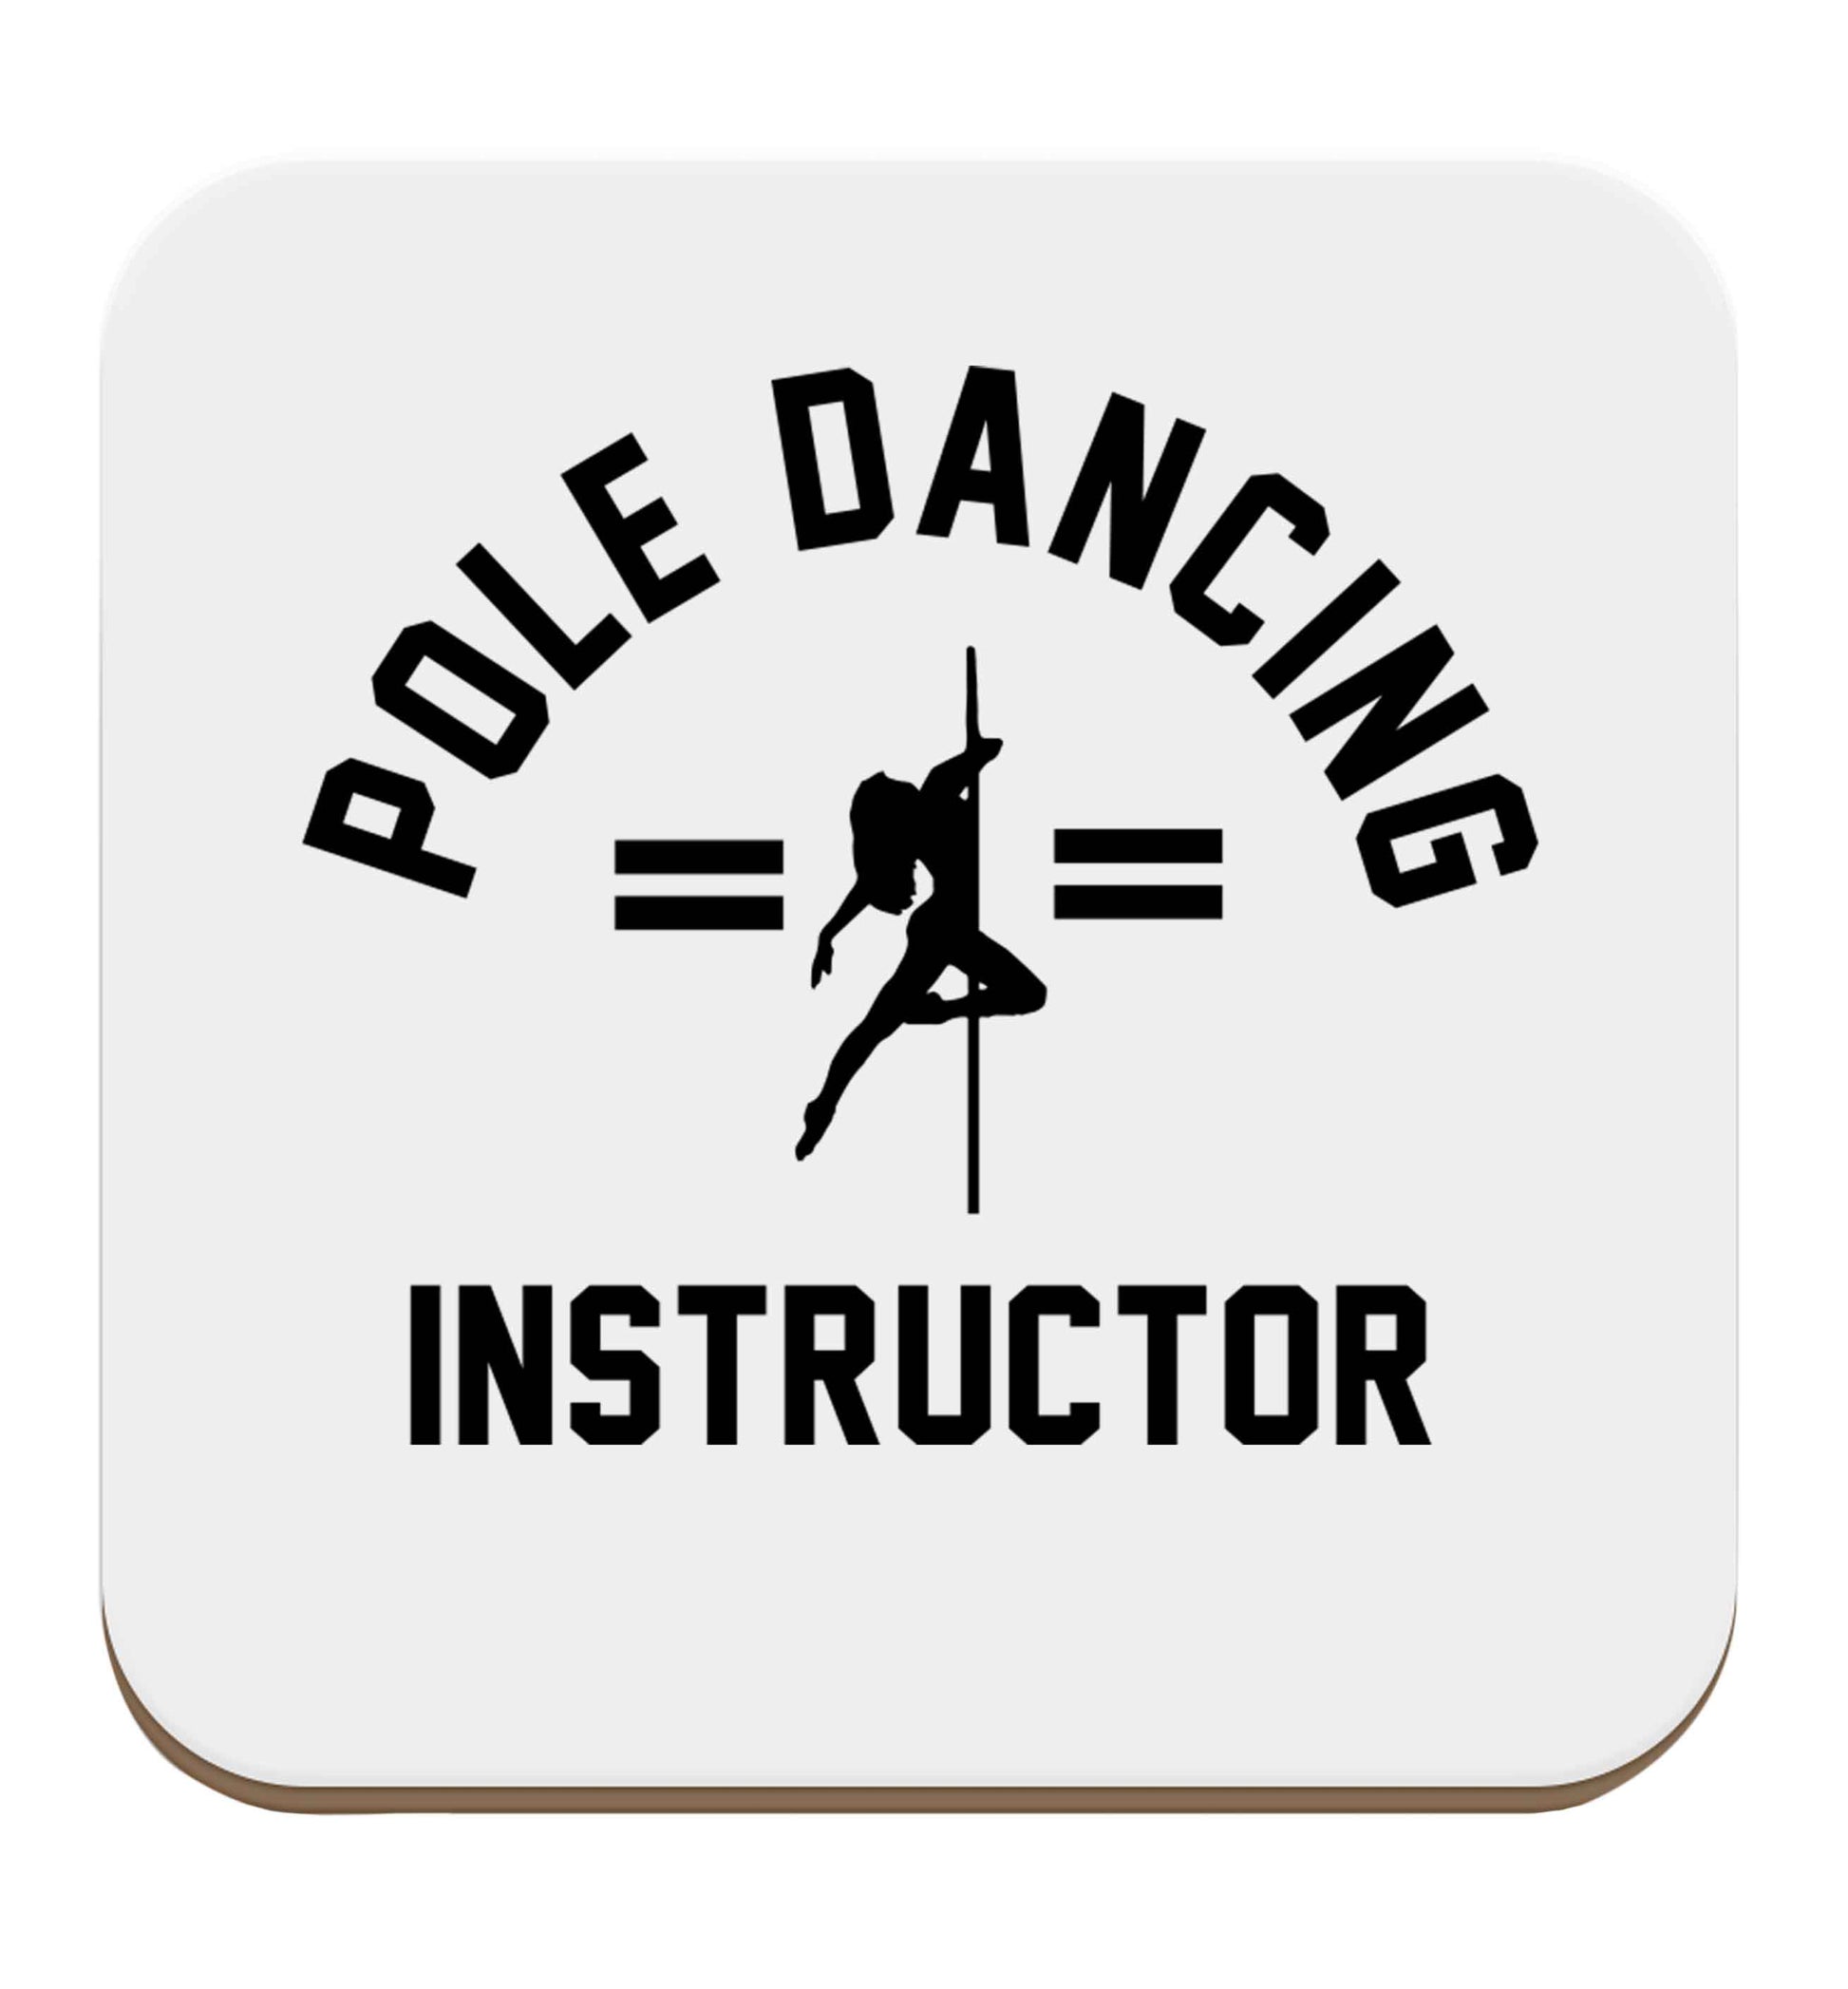 Pole dancing instructor set of four coasters